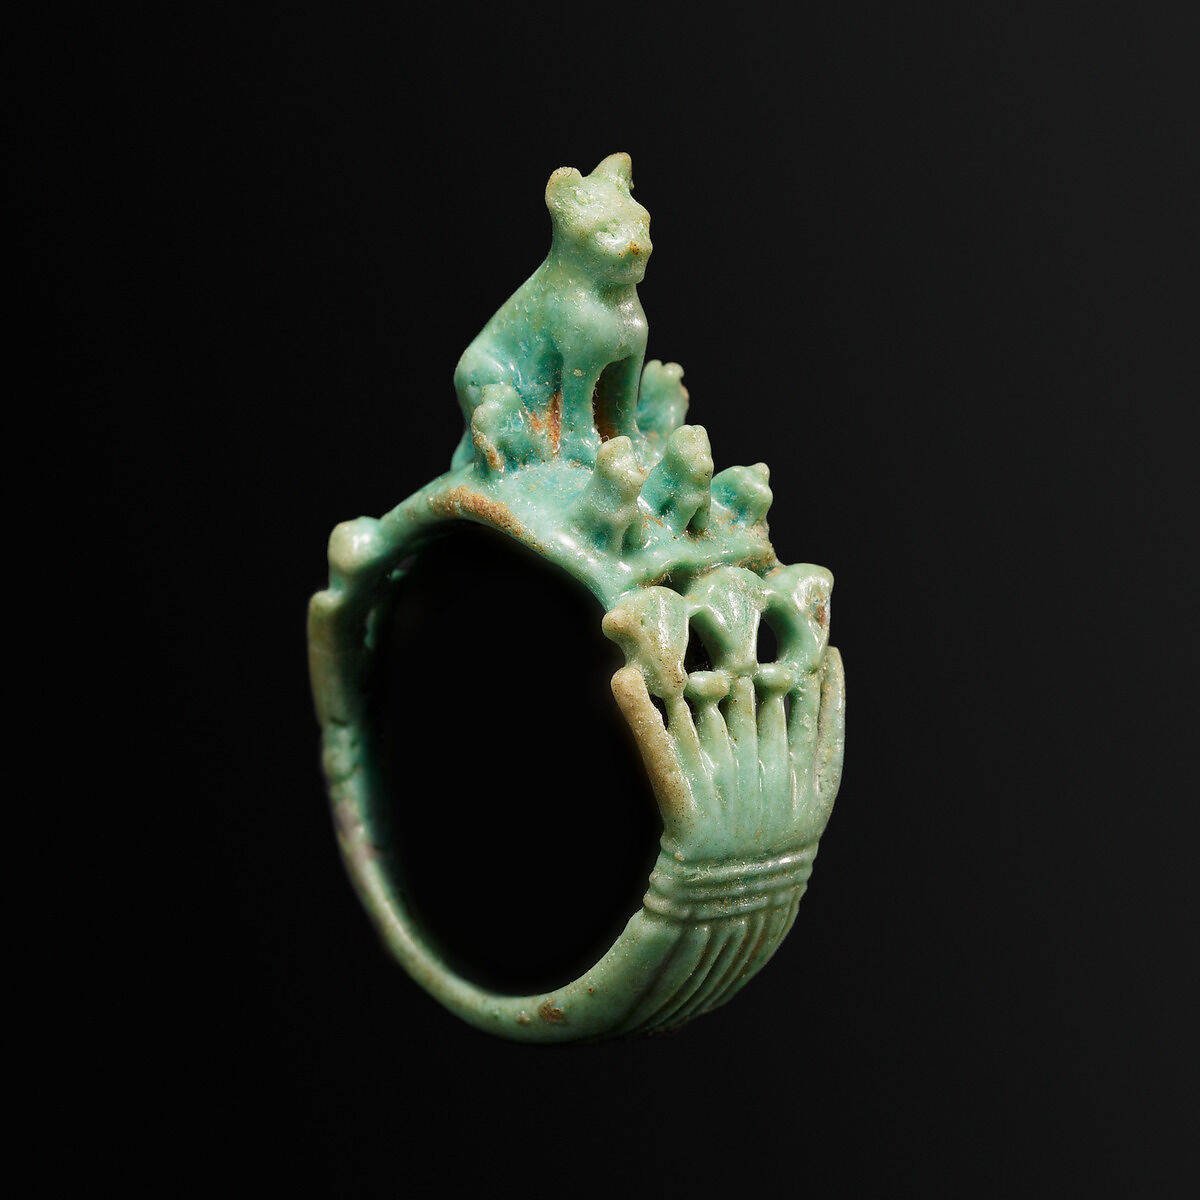 Ring with Cat and Kittens, Faience